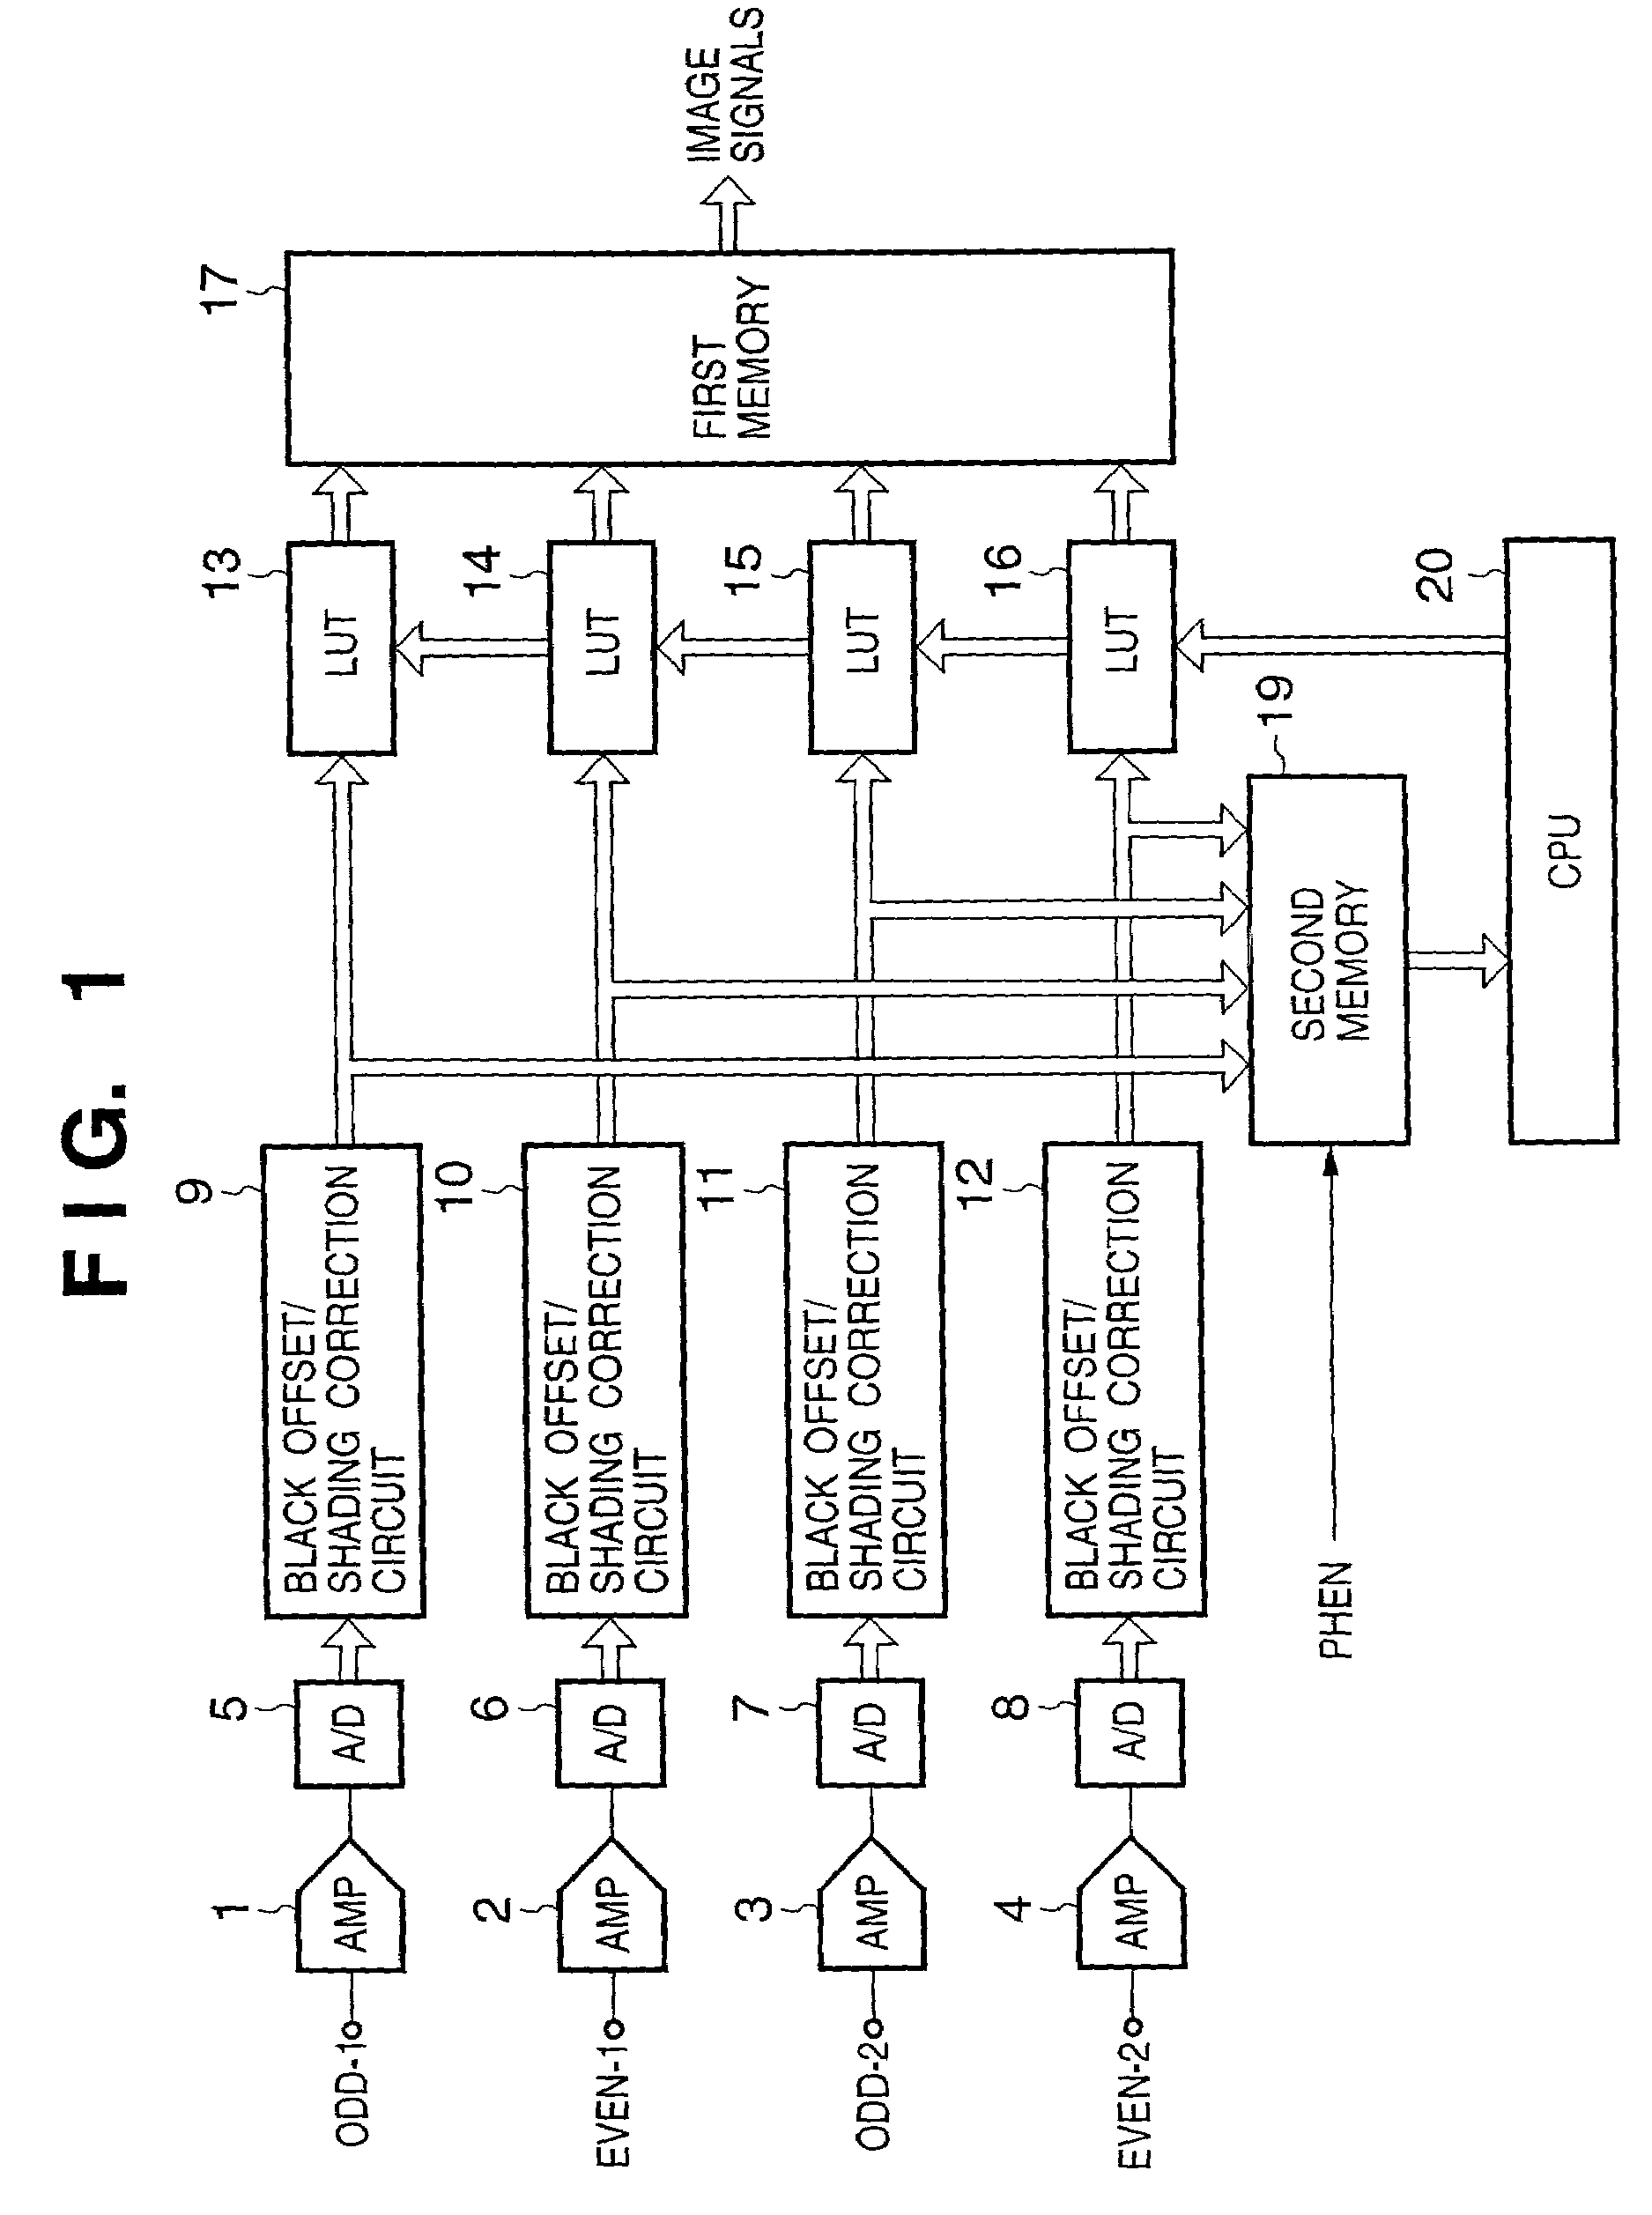 Discrepancy correction method and apparatus for correcting difference in levels of image signals obtained by an image sensor having a multiple output channels